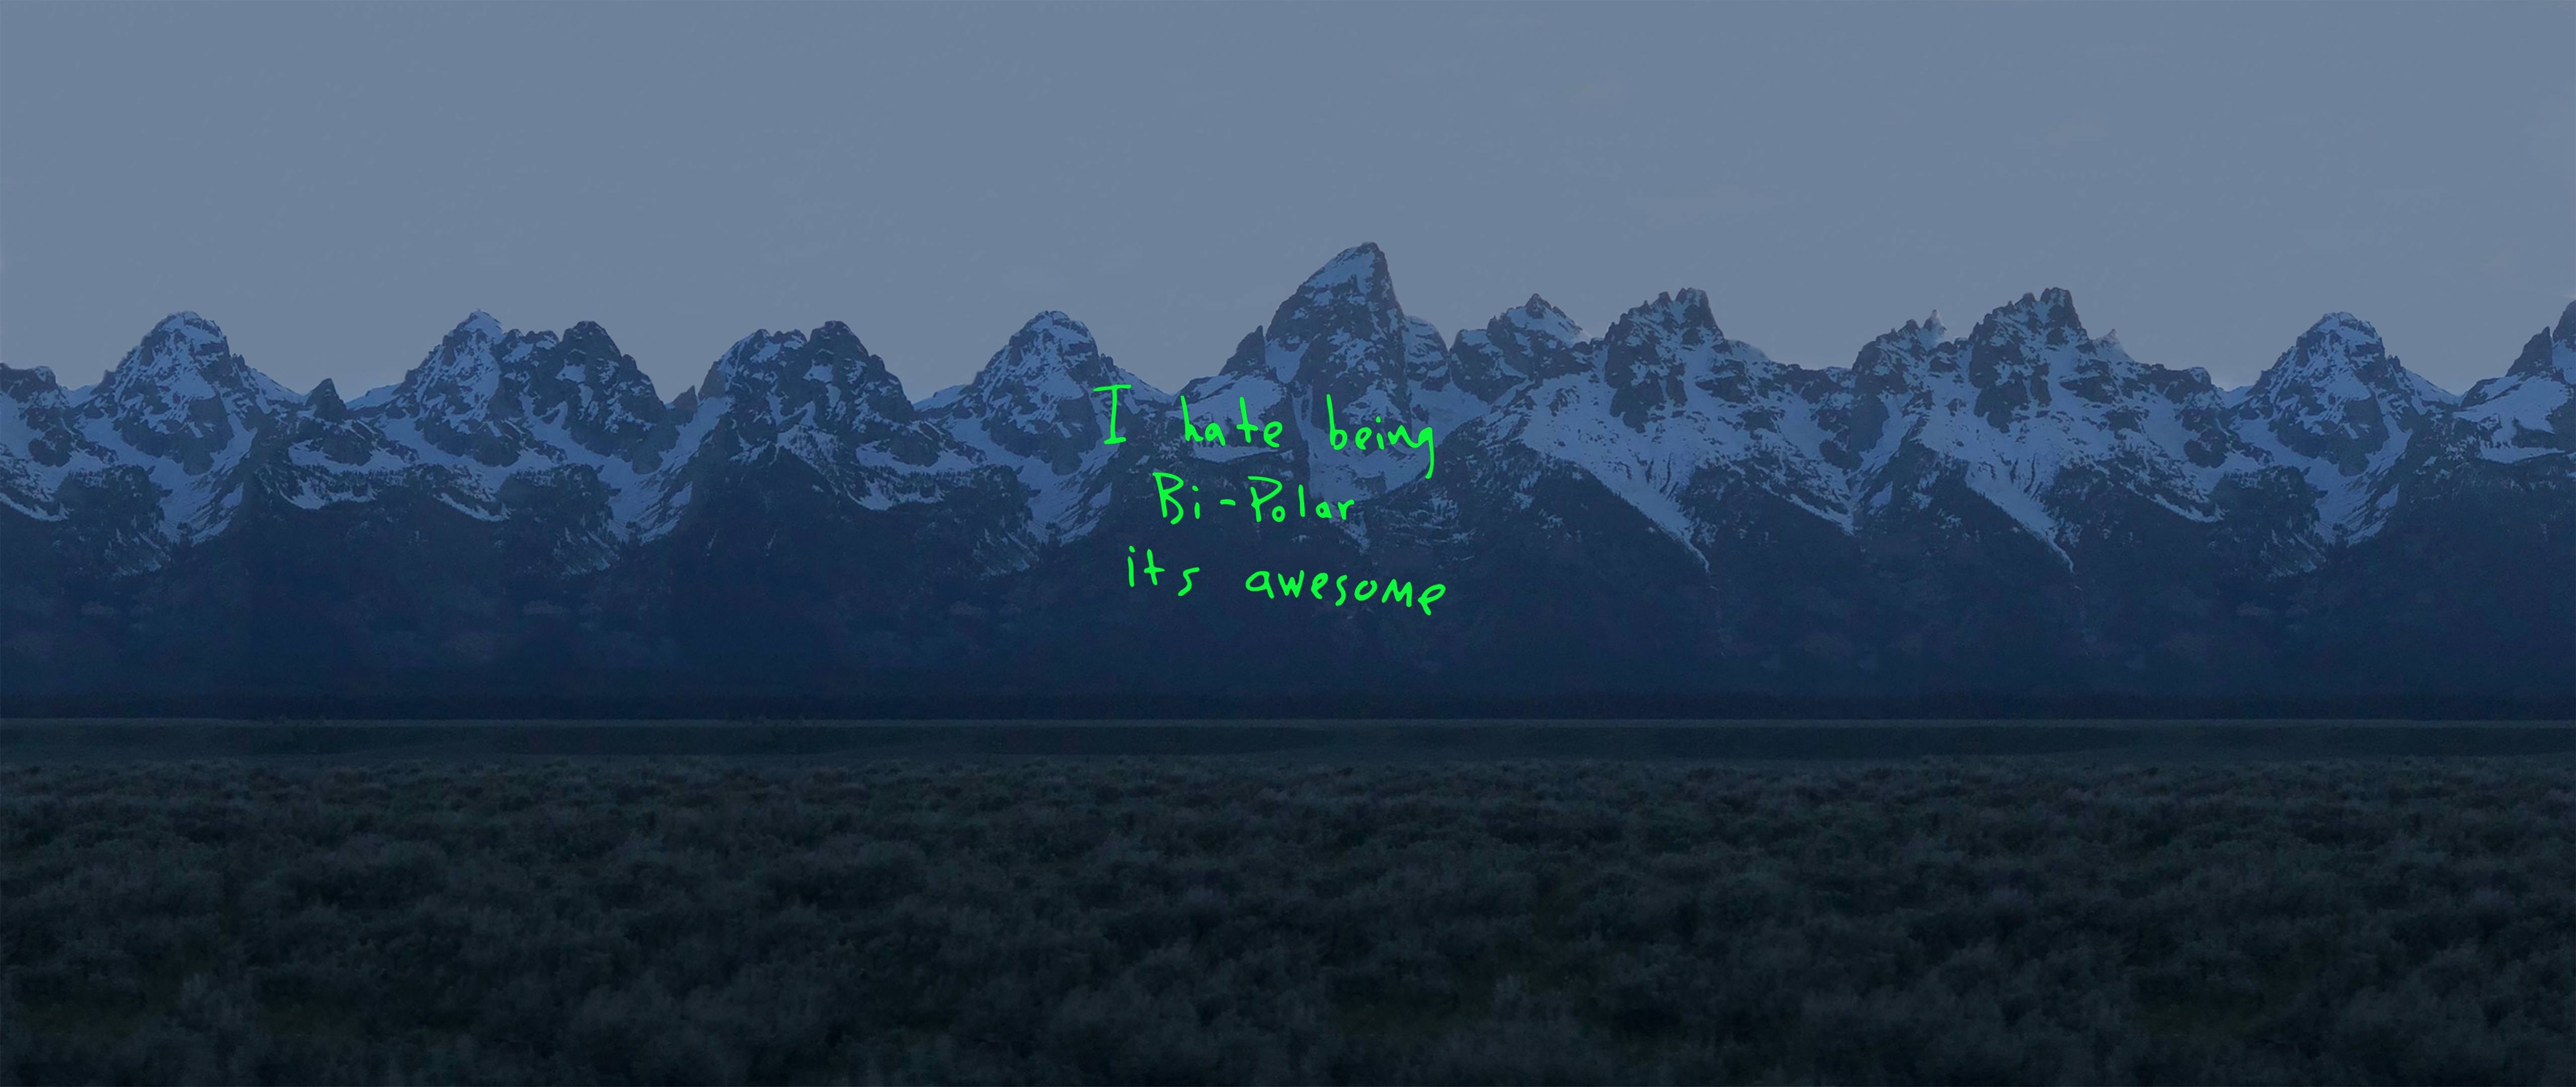 Made a 2560x1080 wallpaper of the ye album cover, enjoy